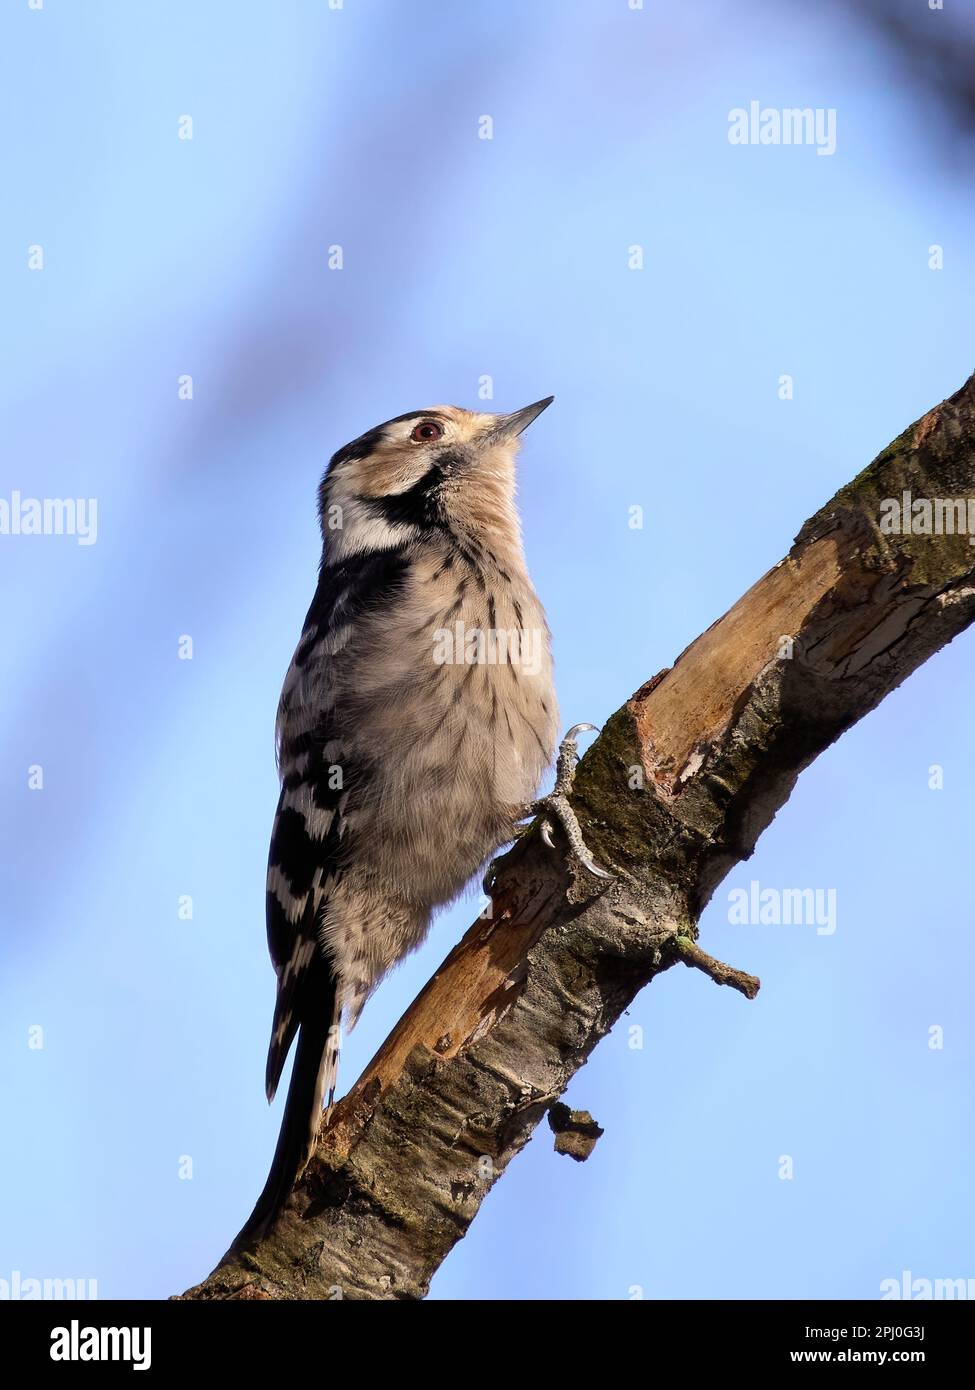 Lesser spotted woodpecker (Dryobates minor) in its natural environment Stock Photo